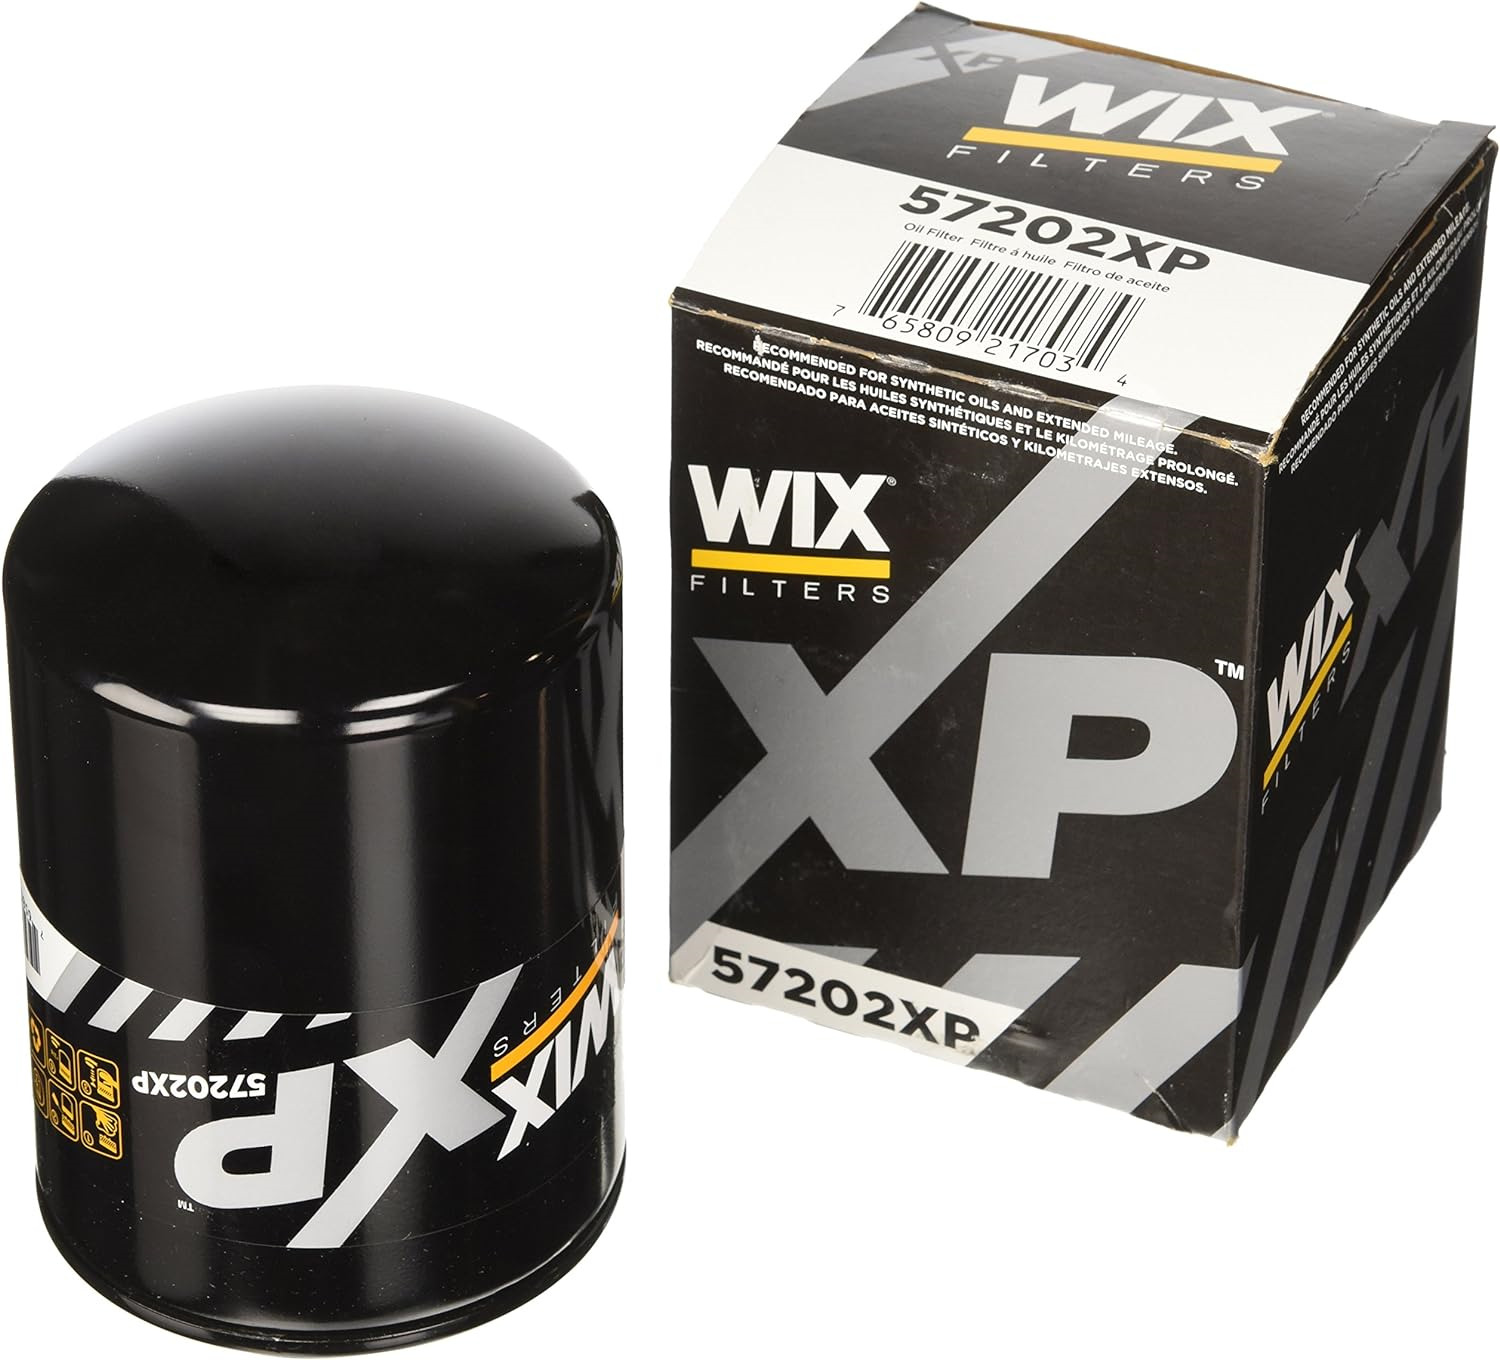 WIX 57202XP XP Oil Filter, Pack of 1 - Packaging May Vary